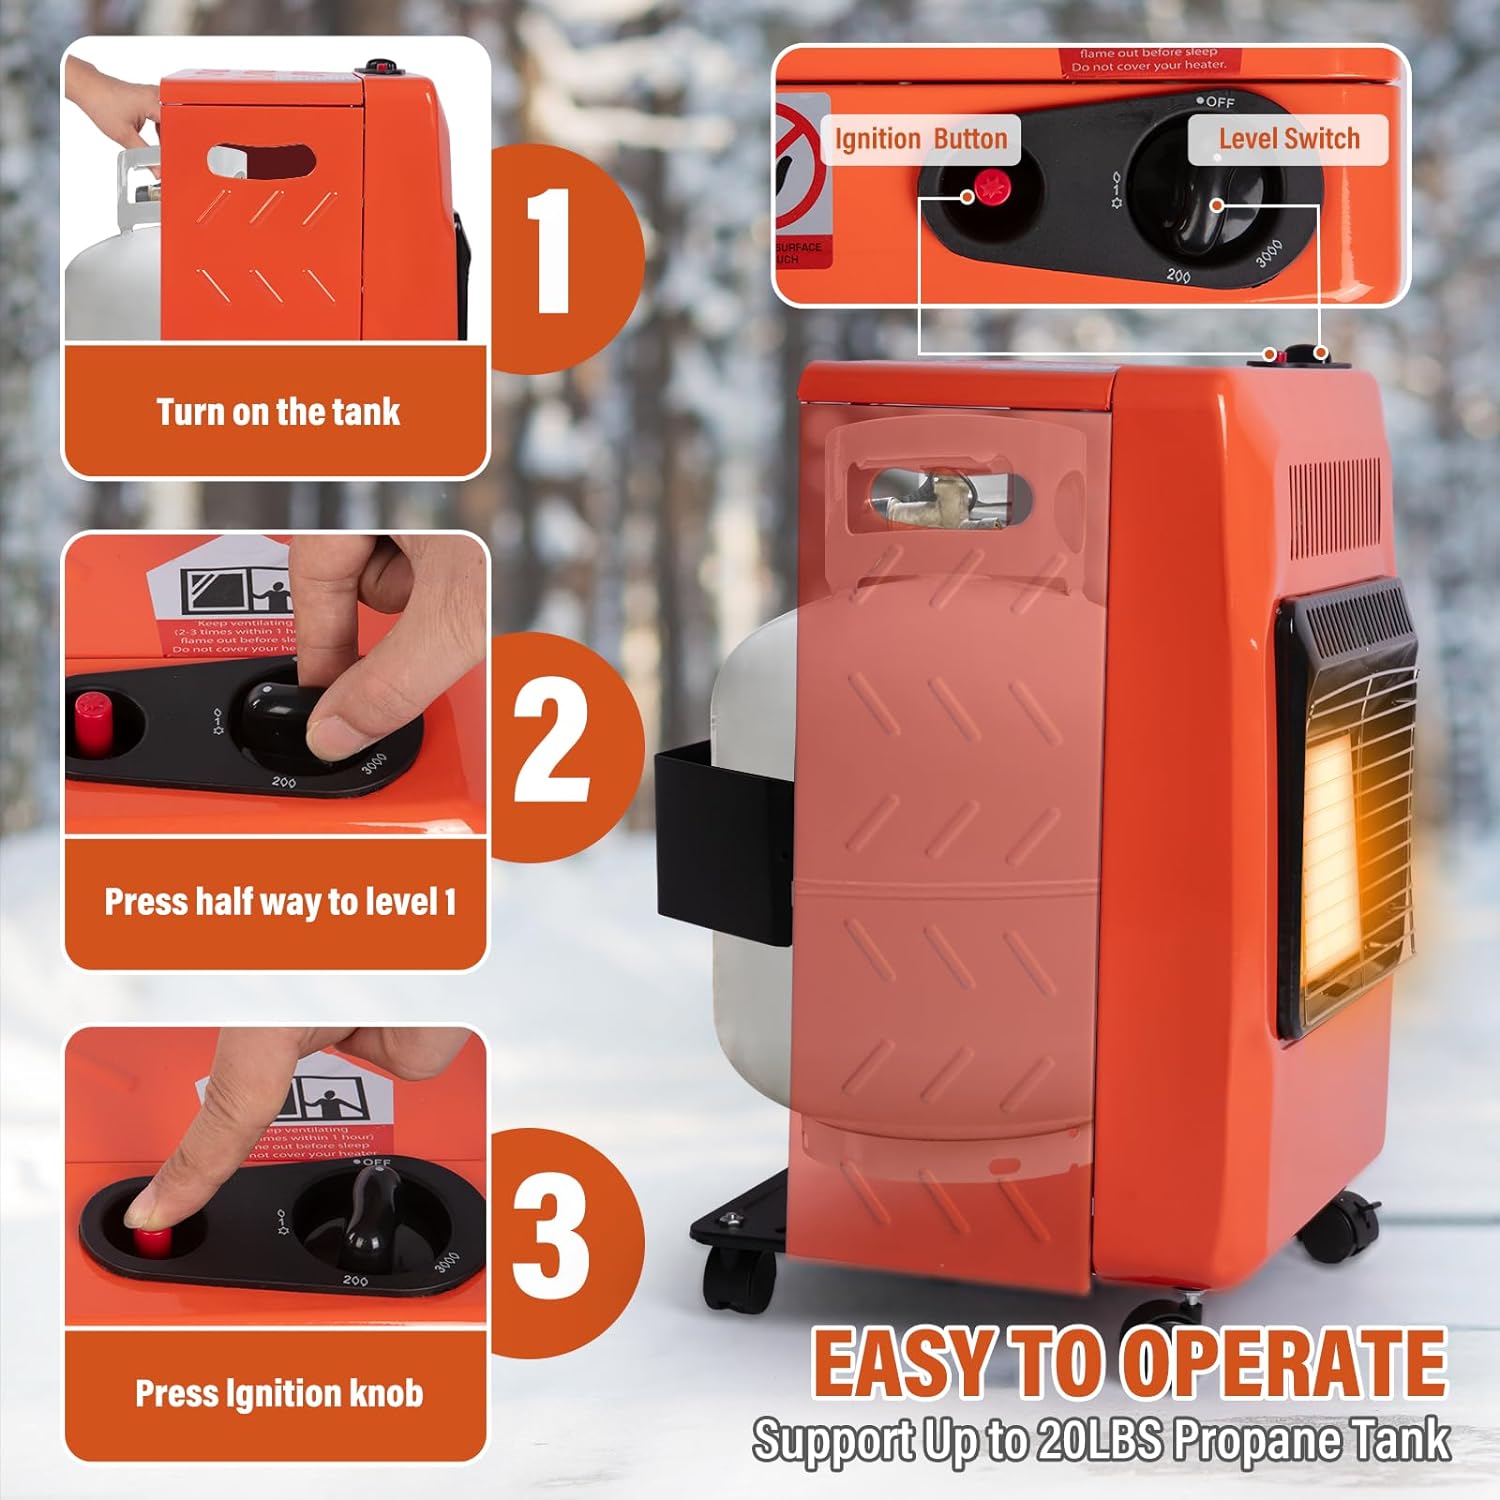 WELLUCK Propane Heater | Portable Patio Heater for Outdoor | LP Cabinet Gas Heater for Camping, Garages, Workshops  Construction Sites |18,000 BTU Warm Area up to 450 sq. ft, 3 Power Settings - WELLUCK Propane Heater Review